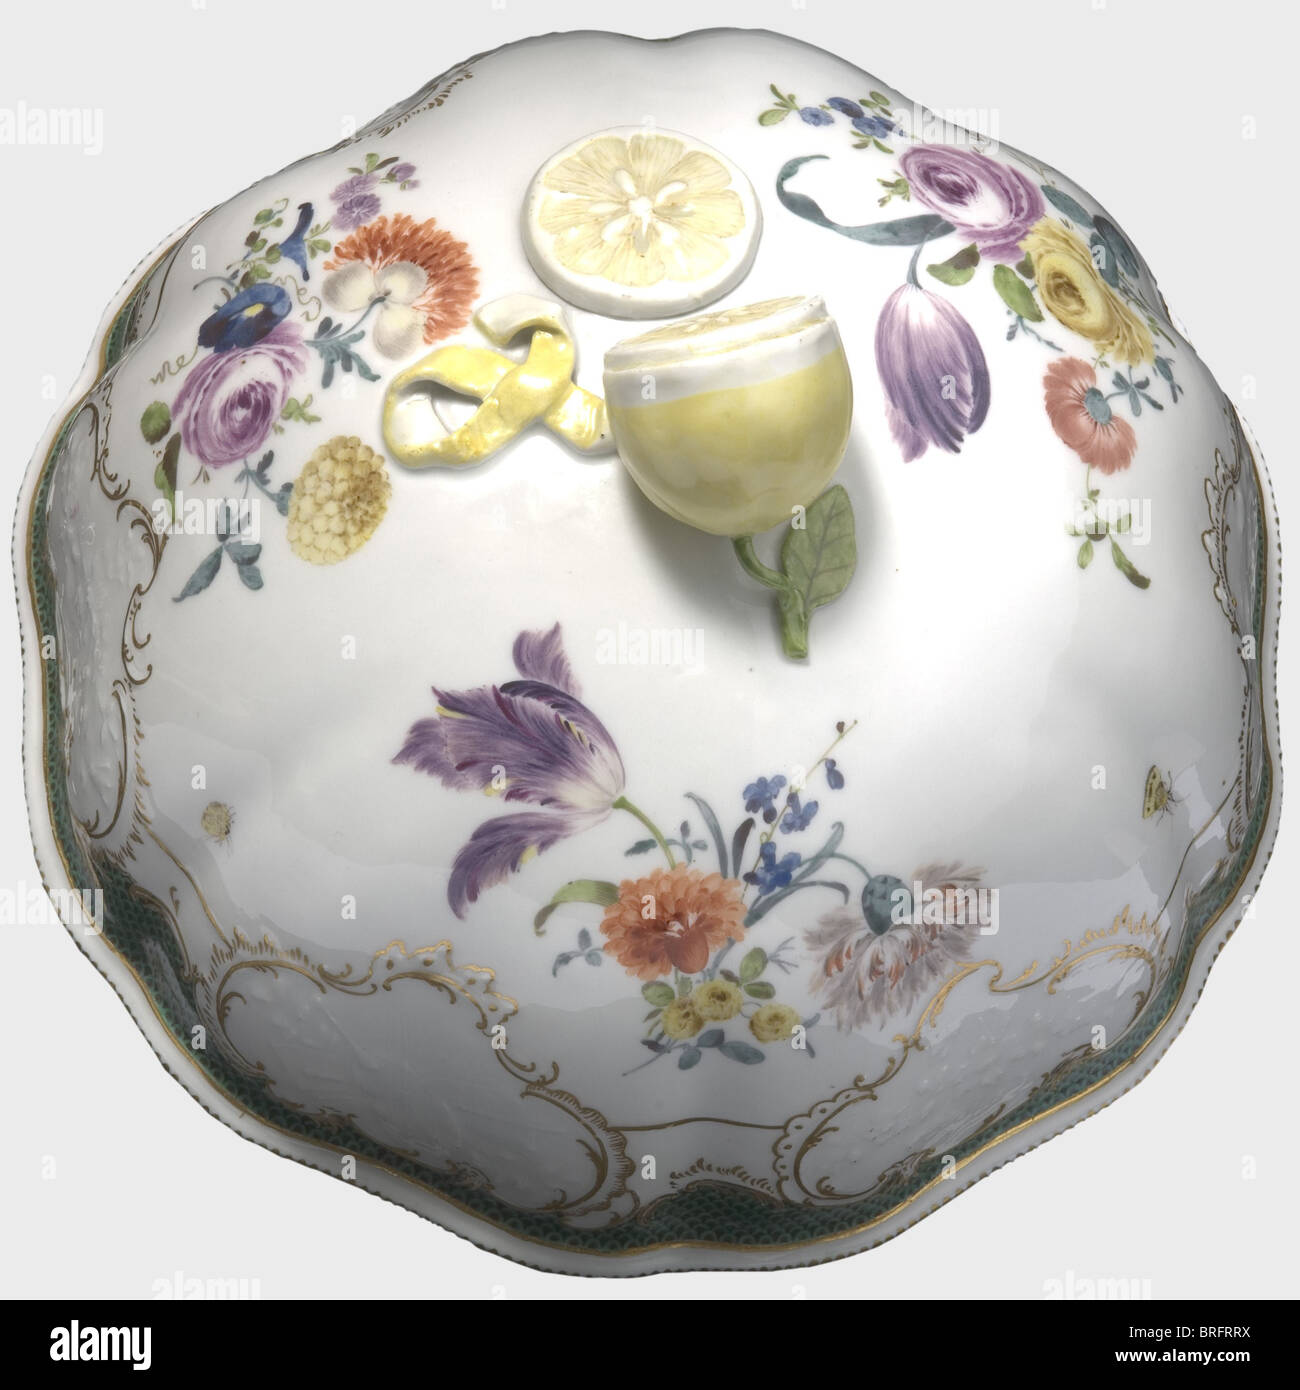 Friedrich II - General Joachim von Zieten(1699 - 1786)- a cloche,Meissen,circa 1760.Porcelain cloche,with a sliced lemon as a handle,hand-painted decorative flowers in colour,and a surrounding copper-green scalloped rim.Cartouches edged in gold with 'Prussian-musical' decoration.An underglaze sword mark on the inside edge.Diameter 28.5 cm.Height 18 cm.The flower pattern with the green scalloped rim was specified for the Zieten service,which Frederick the Great presented to his Cavalry General von Zieten well before the Möllendorff Service.Cf.The,Additional-Rights-Clearences-Not Available Stock Photo